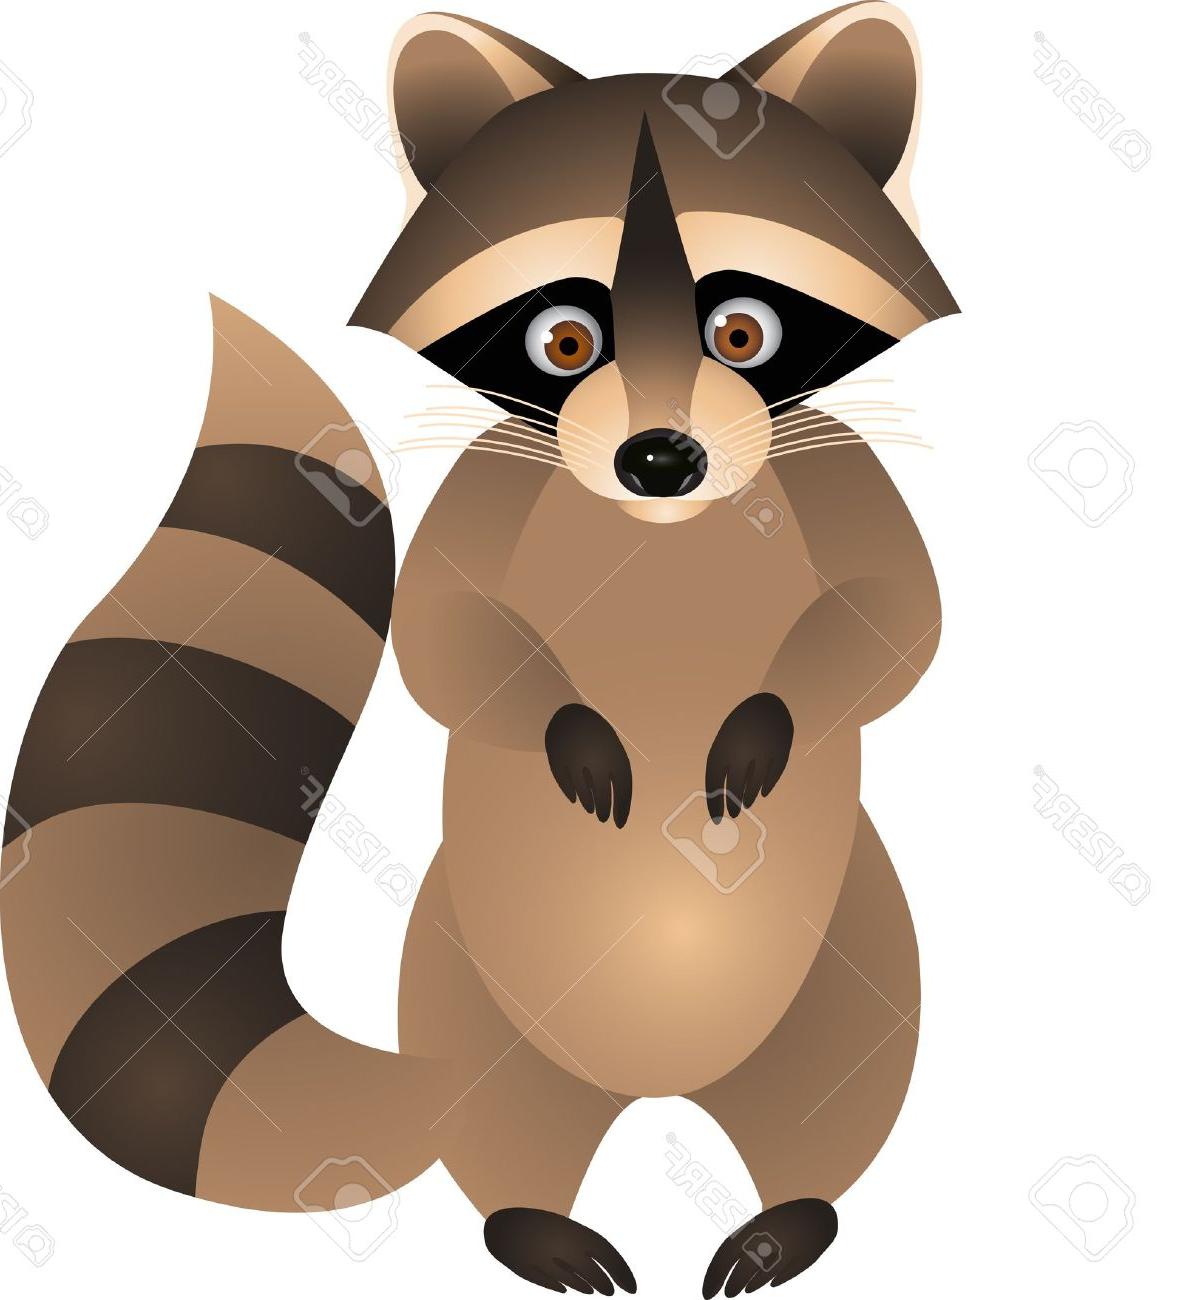 Best Free Raccoon Clip Art Pictures » Free Vector Art, Images.